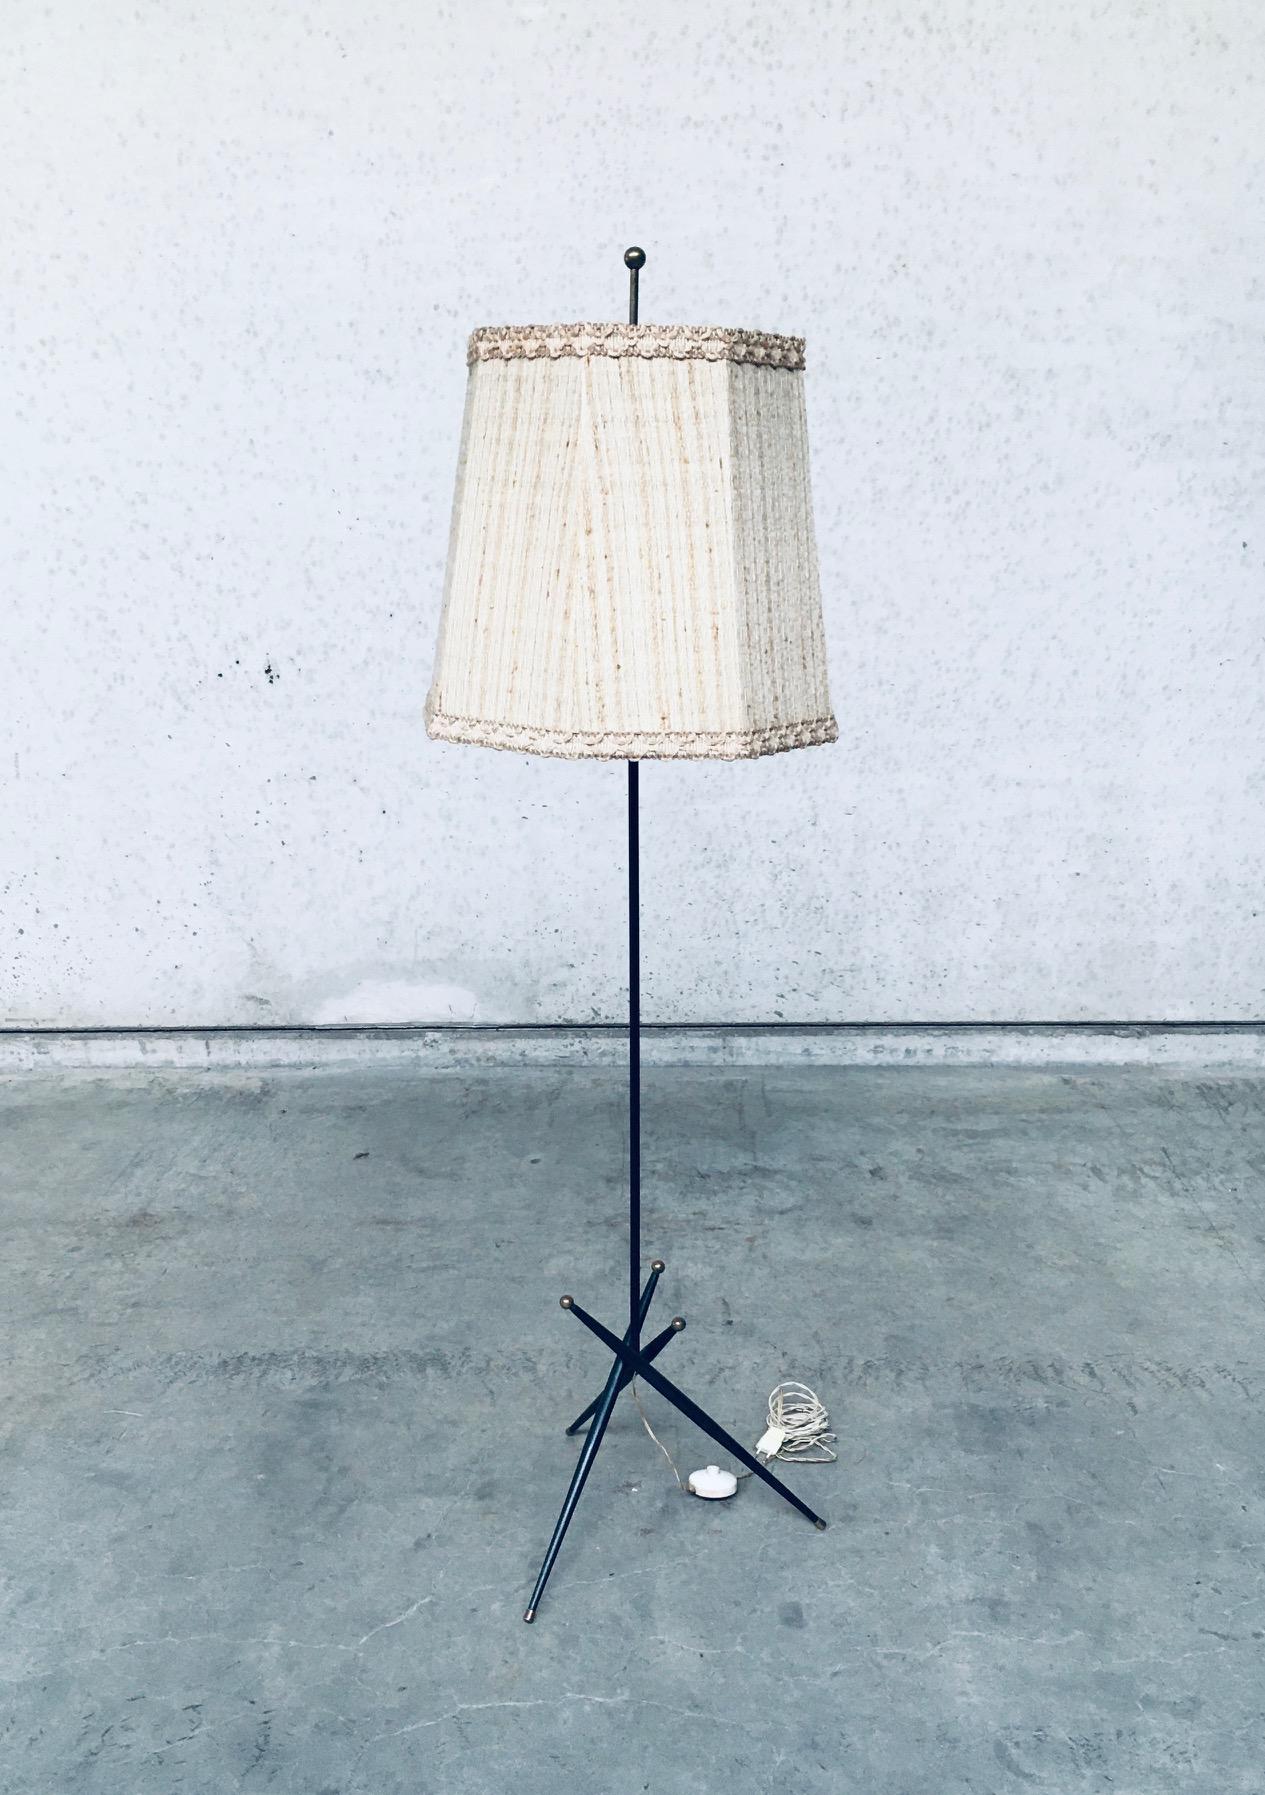 Vintage Midcentury Modern Belgian Design Atomic Age Floor Lamp, made in Belgium 1950's. Black laquered metal base with brass tips and original beige boucle fabric lampshade. The metal lamp is in very good, original condition. Lampshade in well used